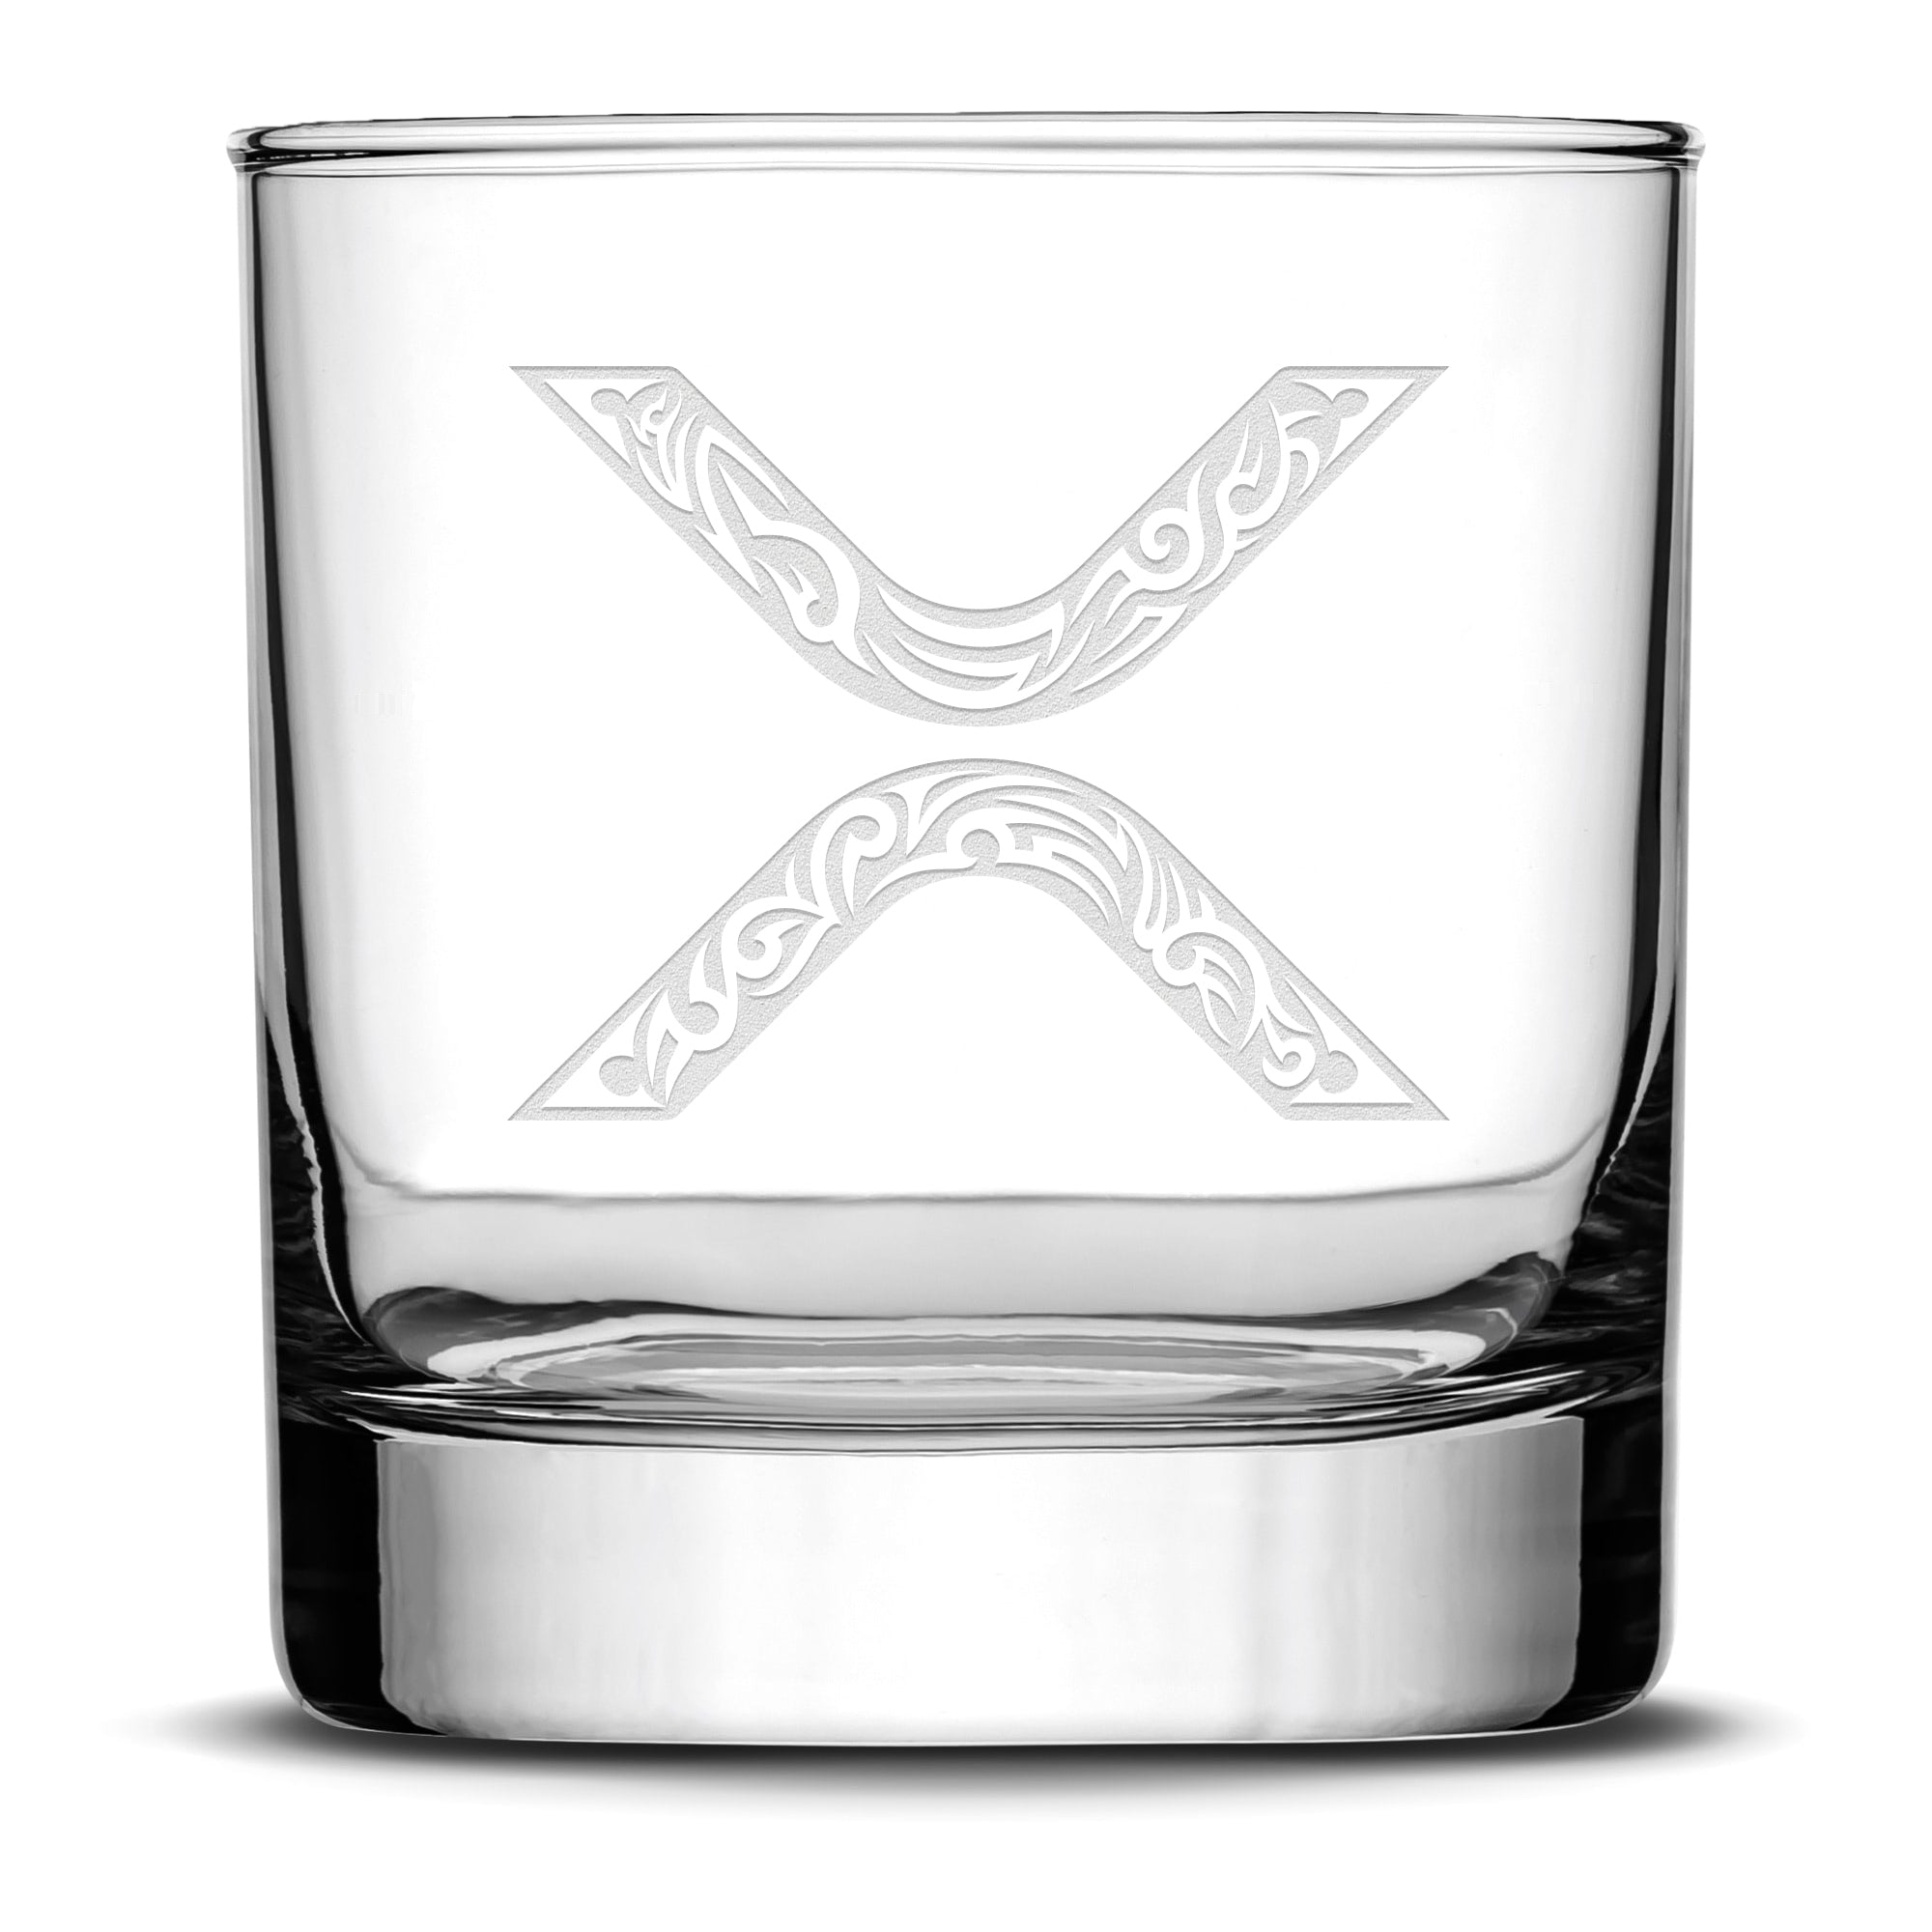 Integrity Bottles Premium, Tribal XRP Crypto Coin Whiskey Glass, Hand Etched, Rocks Glass, Made in USA, 11oz